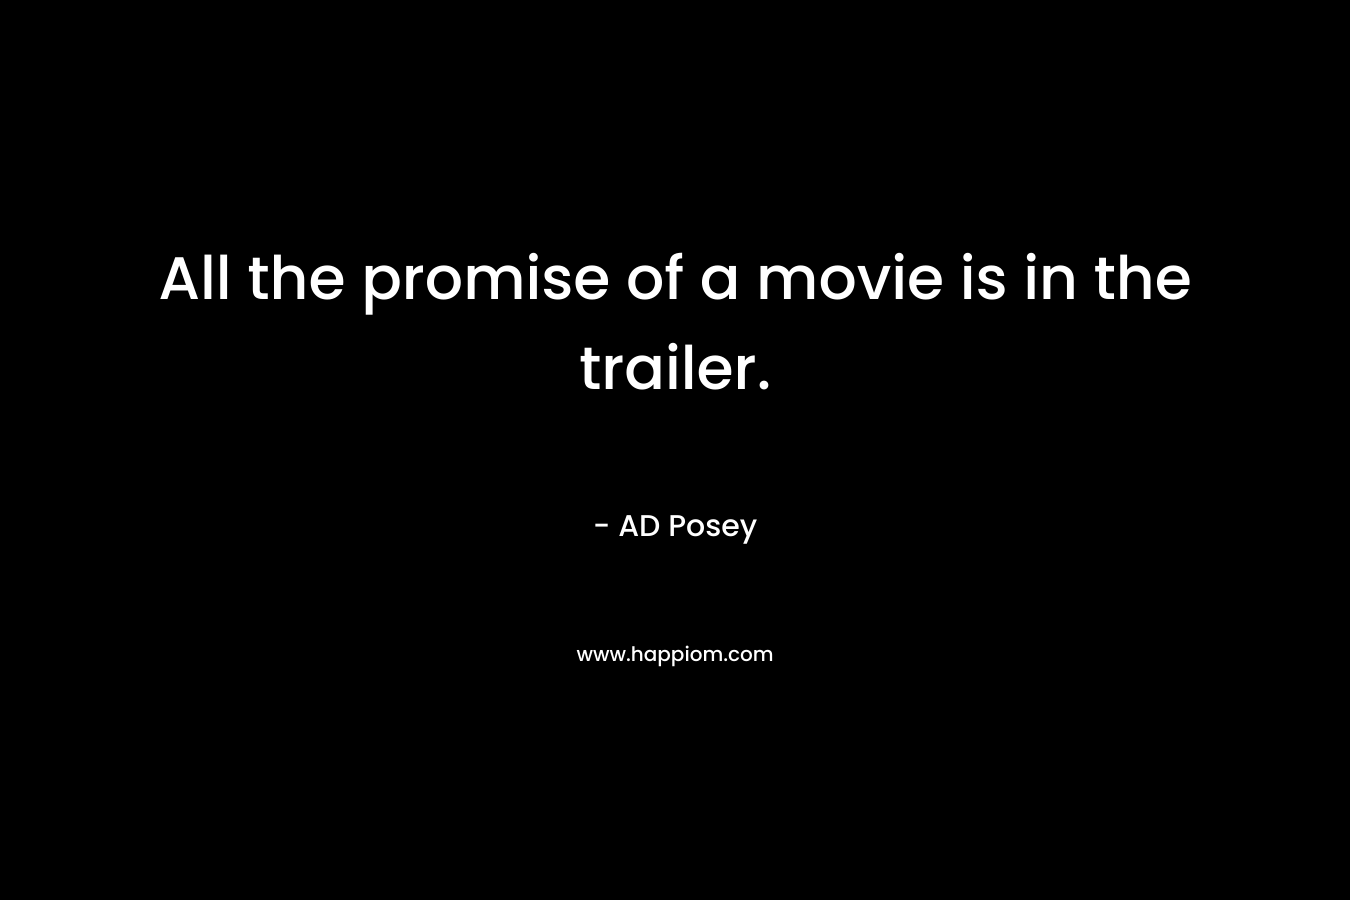 All the promise of a movie is in the trailer. – AD Posey